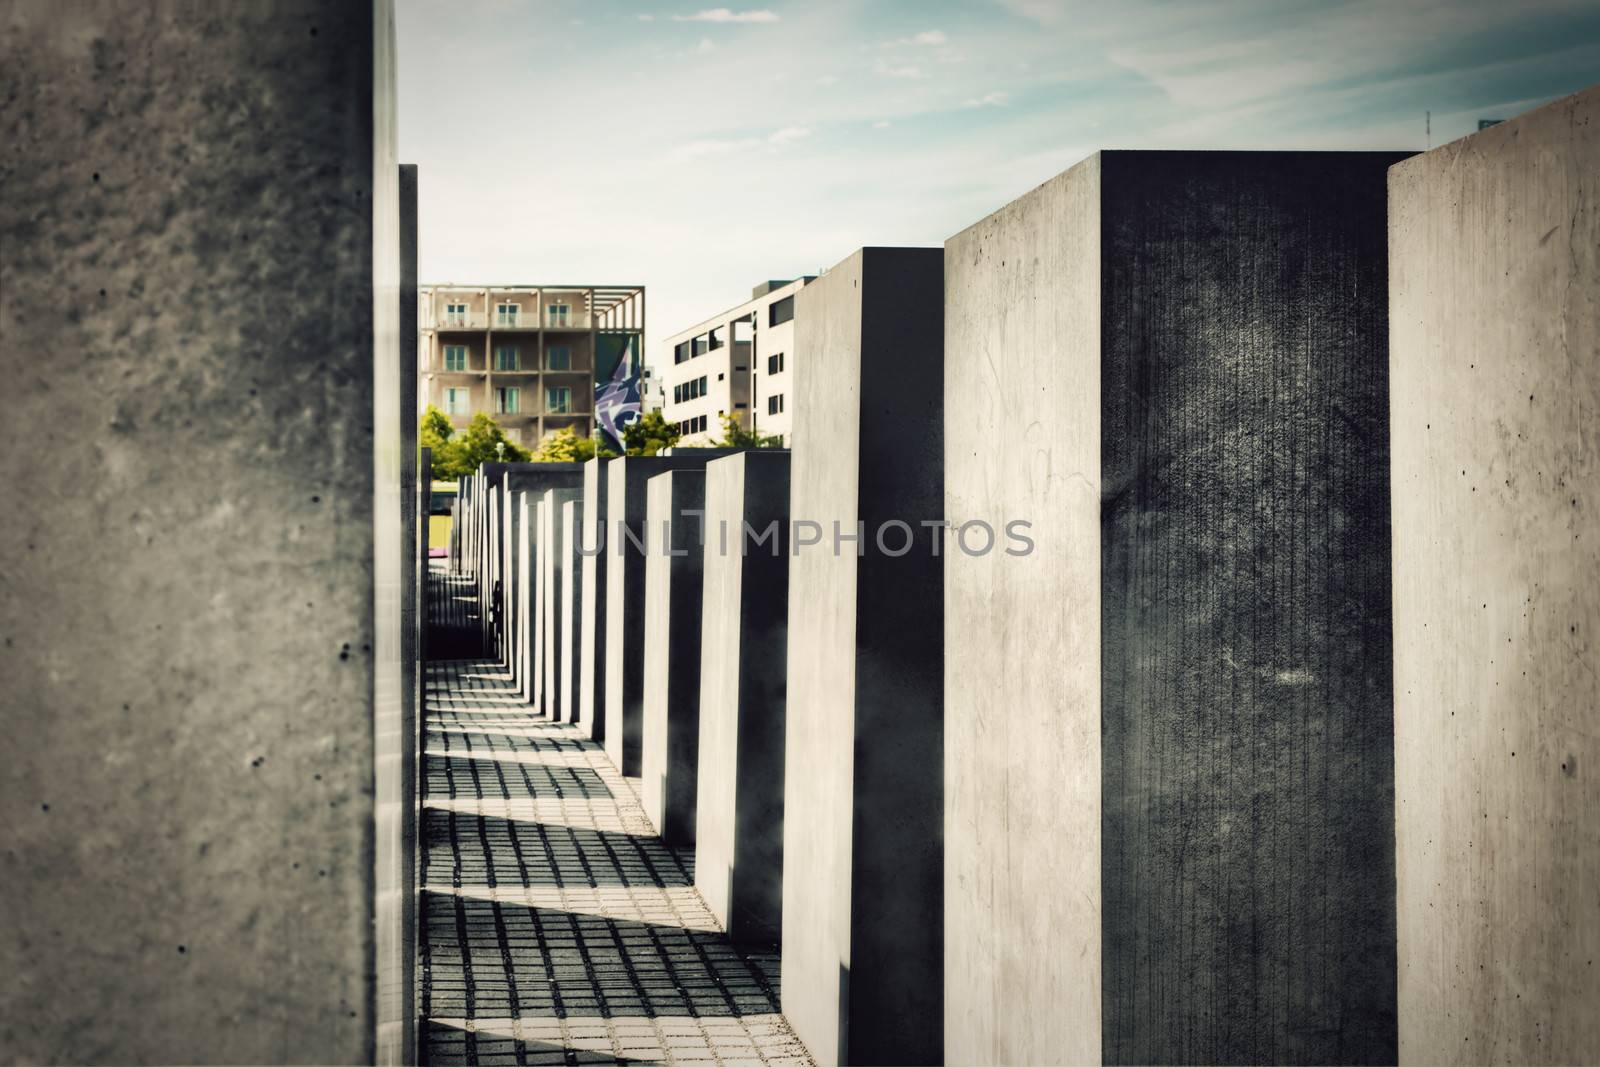 The Holocaust Memorial, Berlin, Germany by photocreo